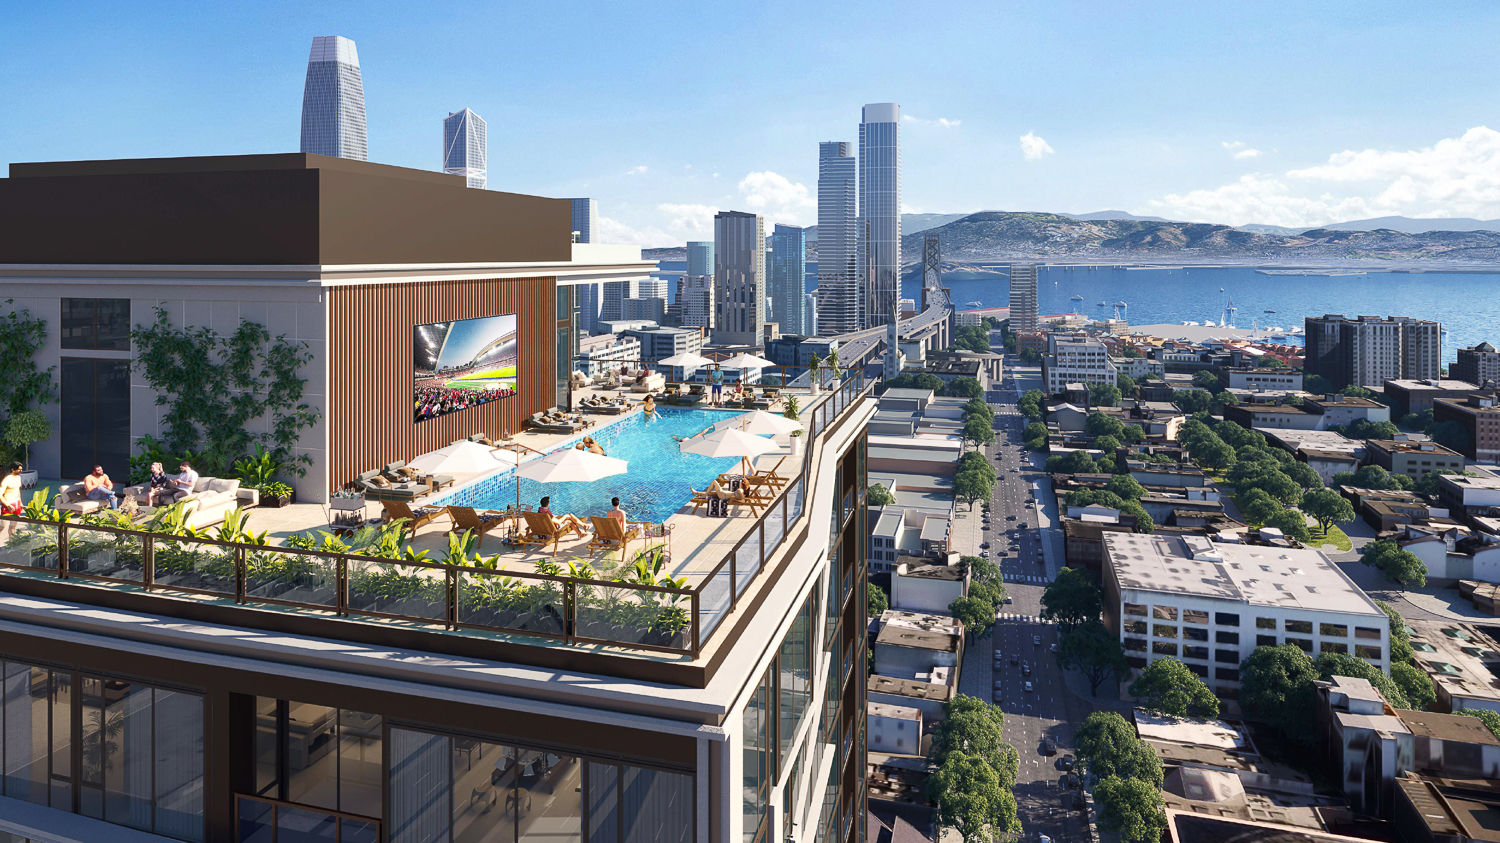 598 Bryant Street amenity pool deck, rendering by BDE Architecture